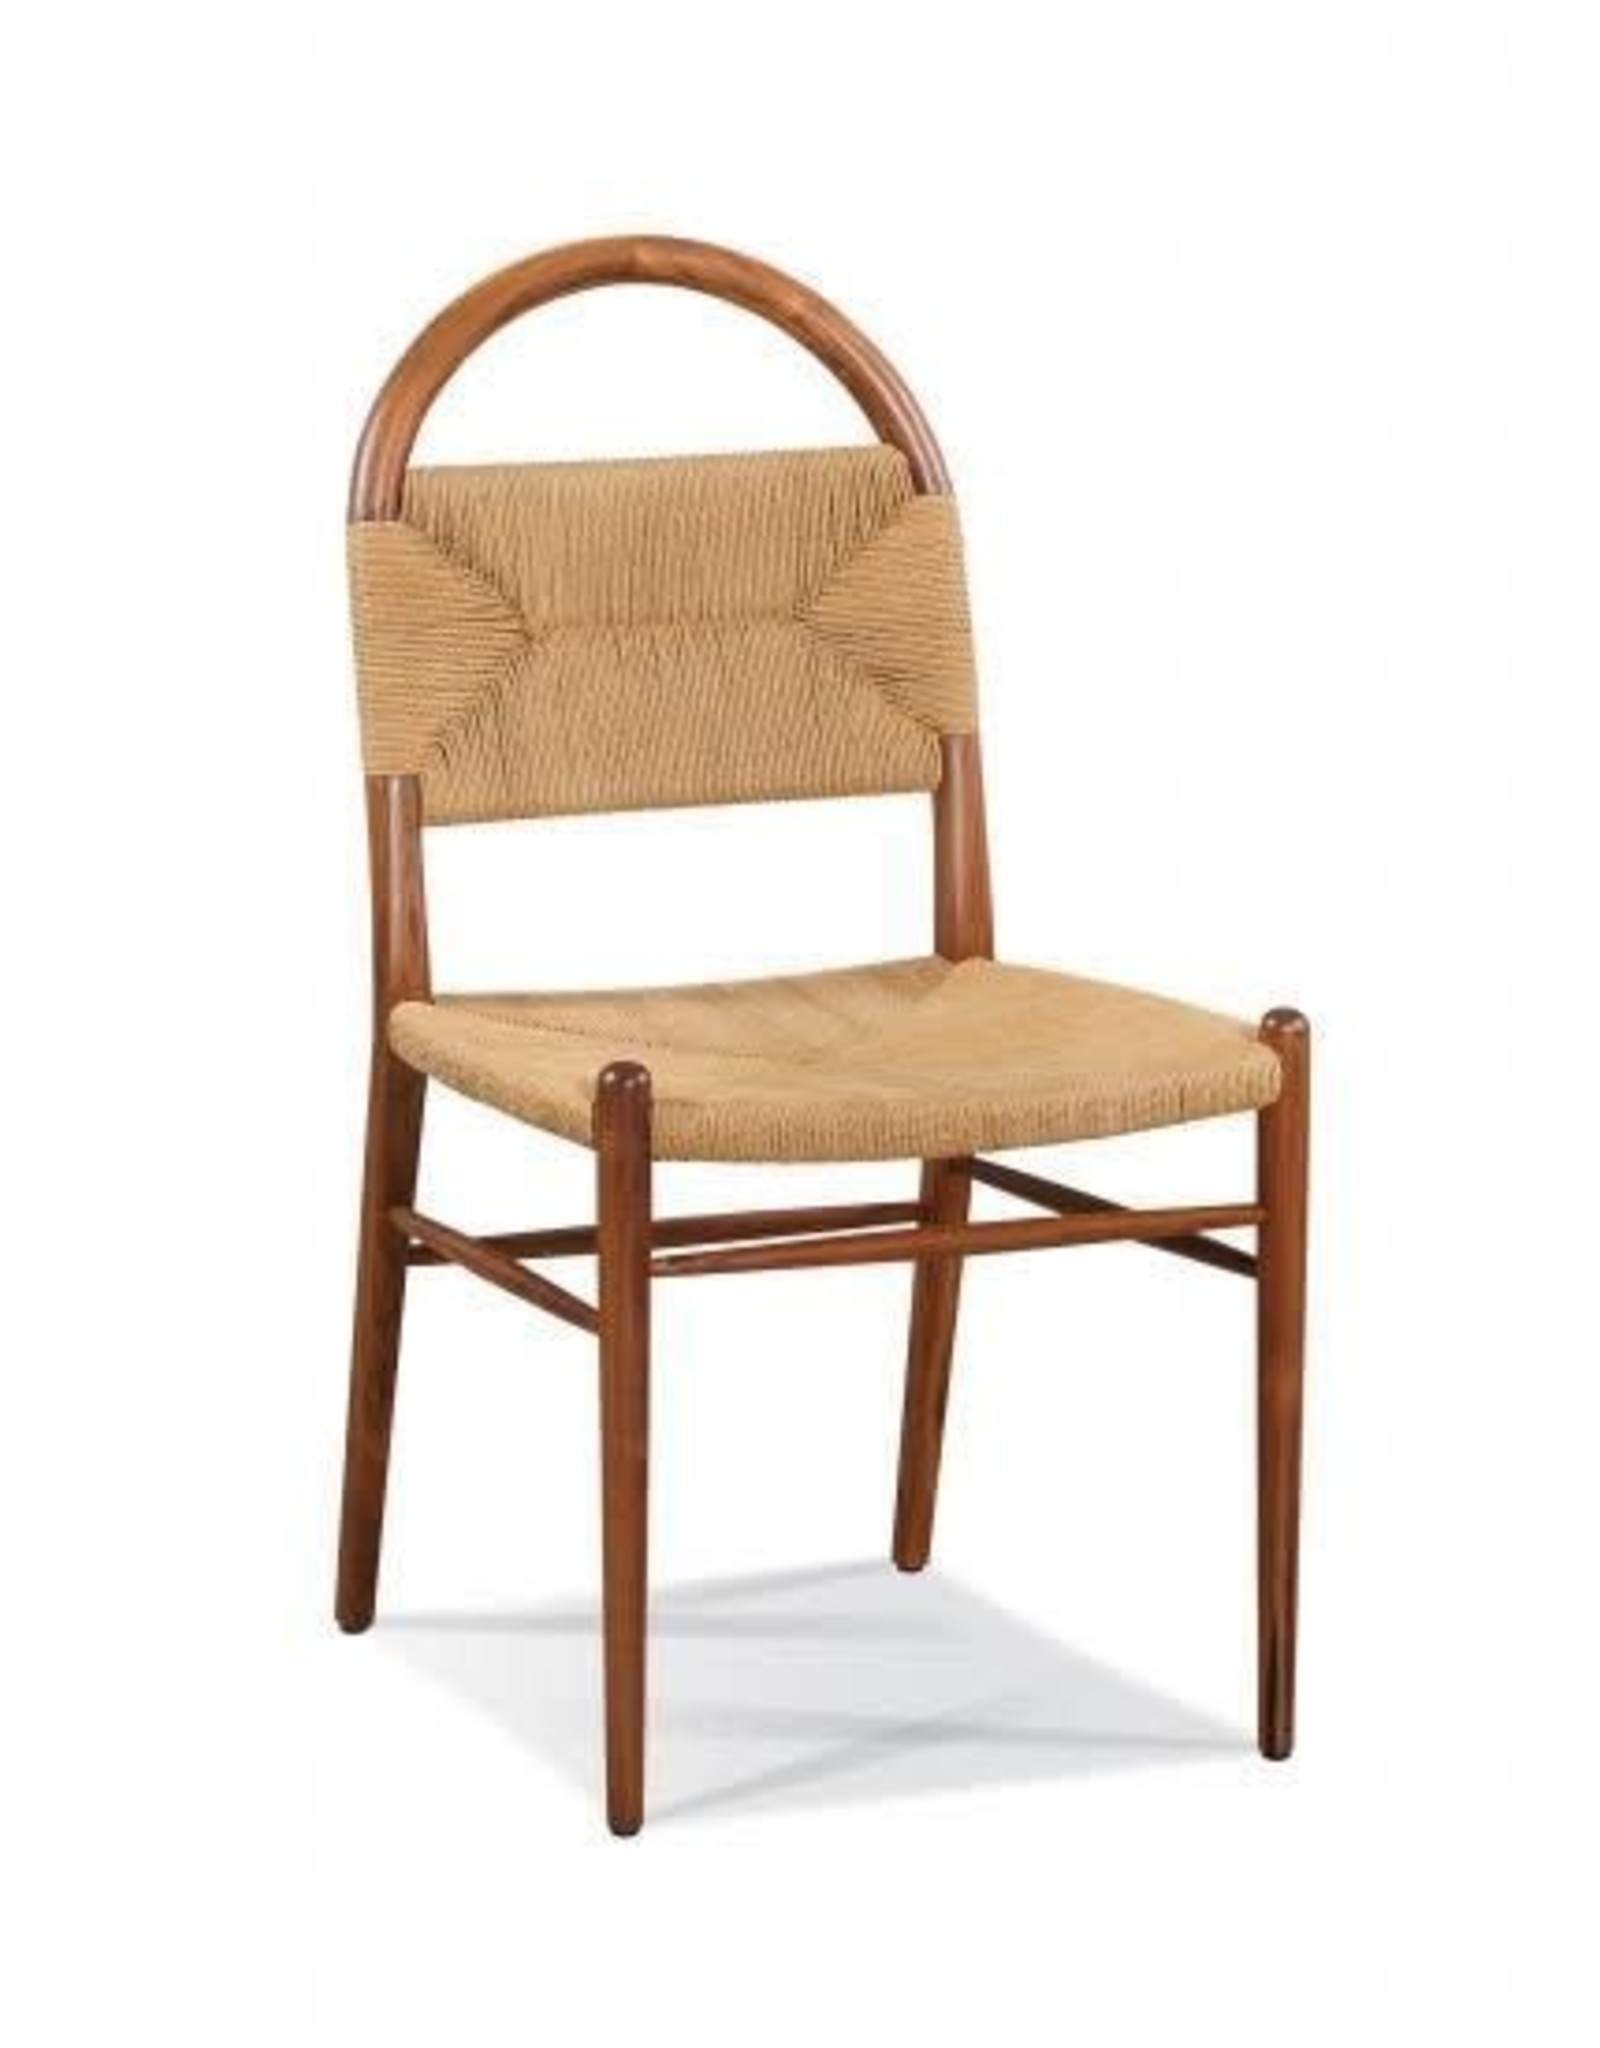 Pernelle Woven Rush Side Chair - Walnut